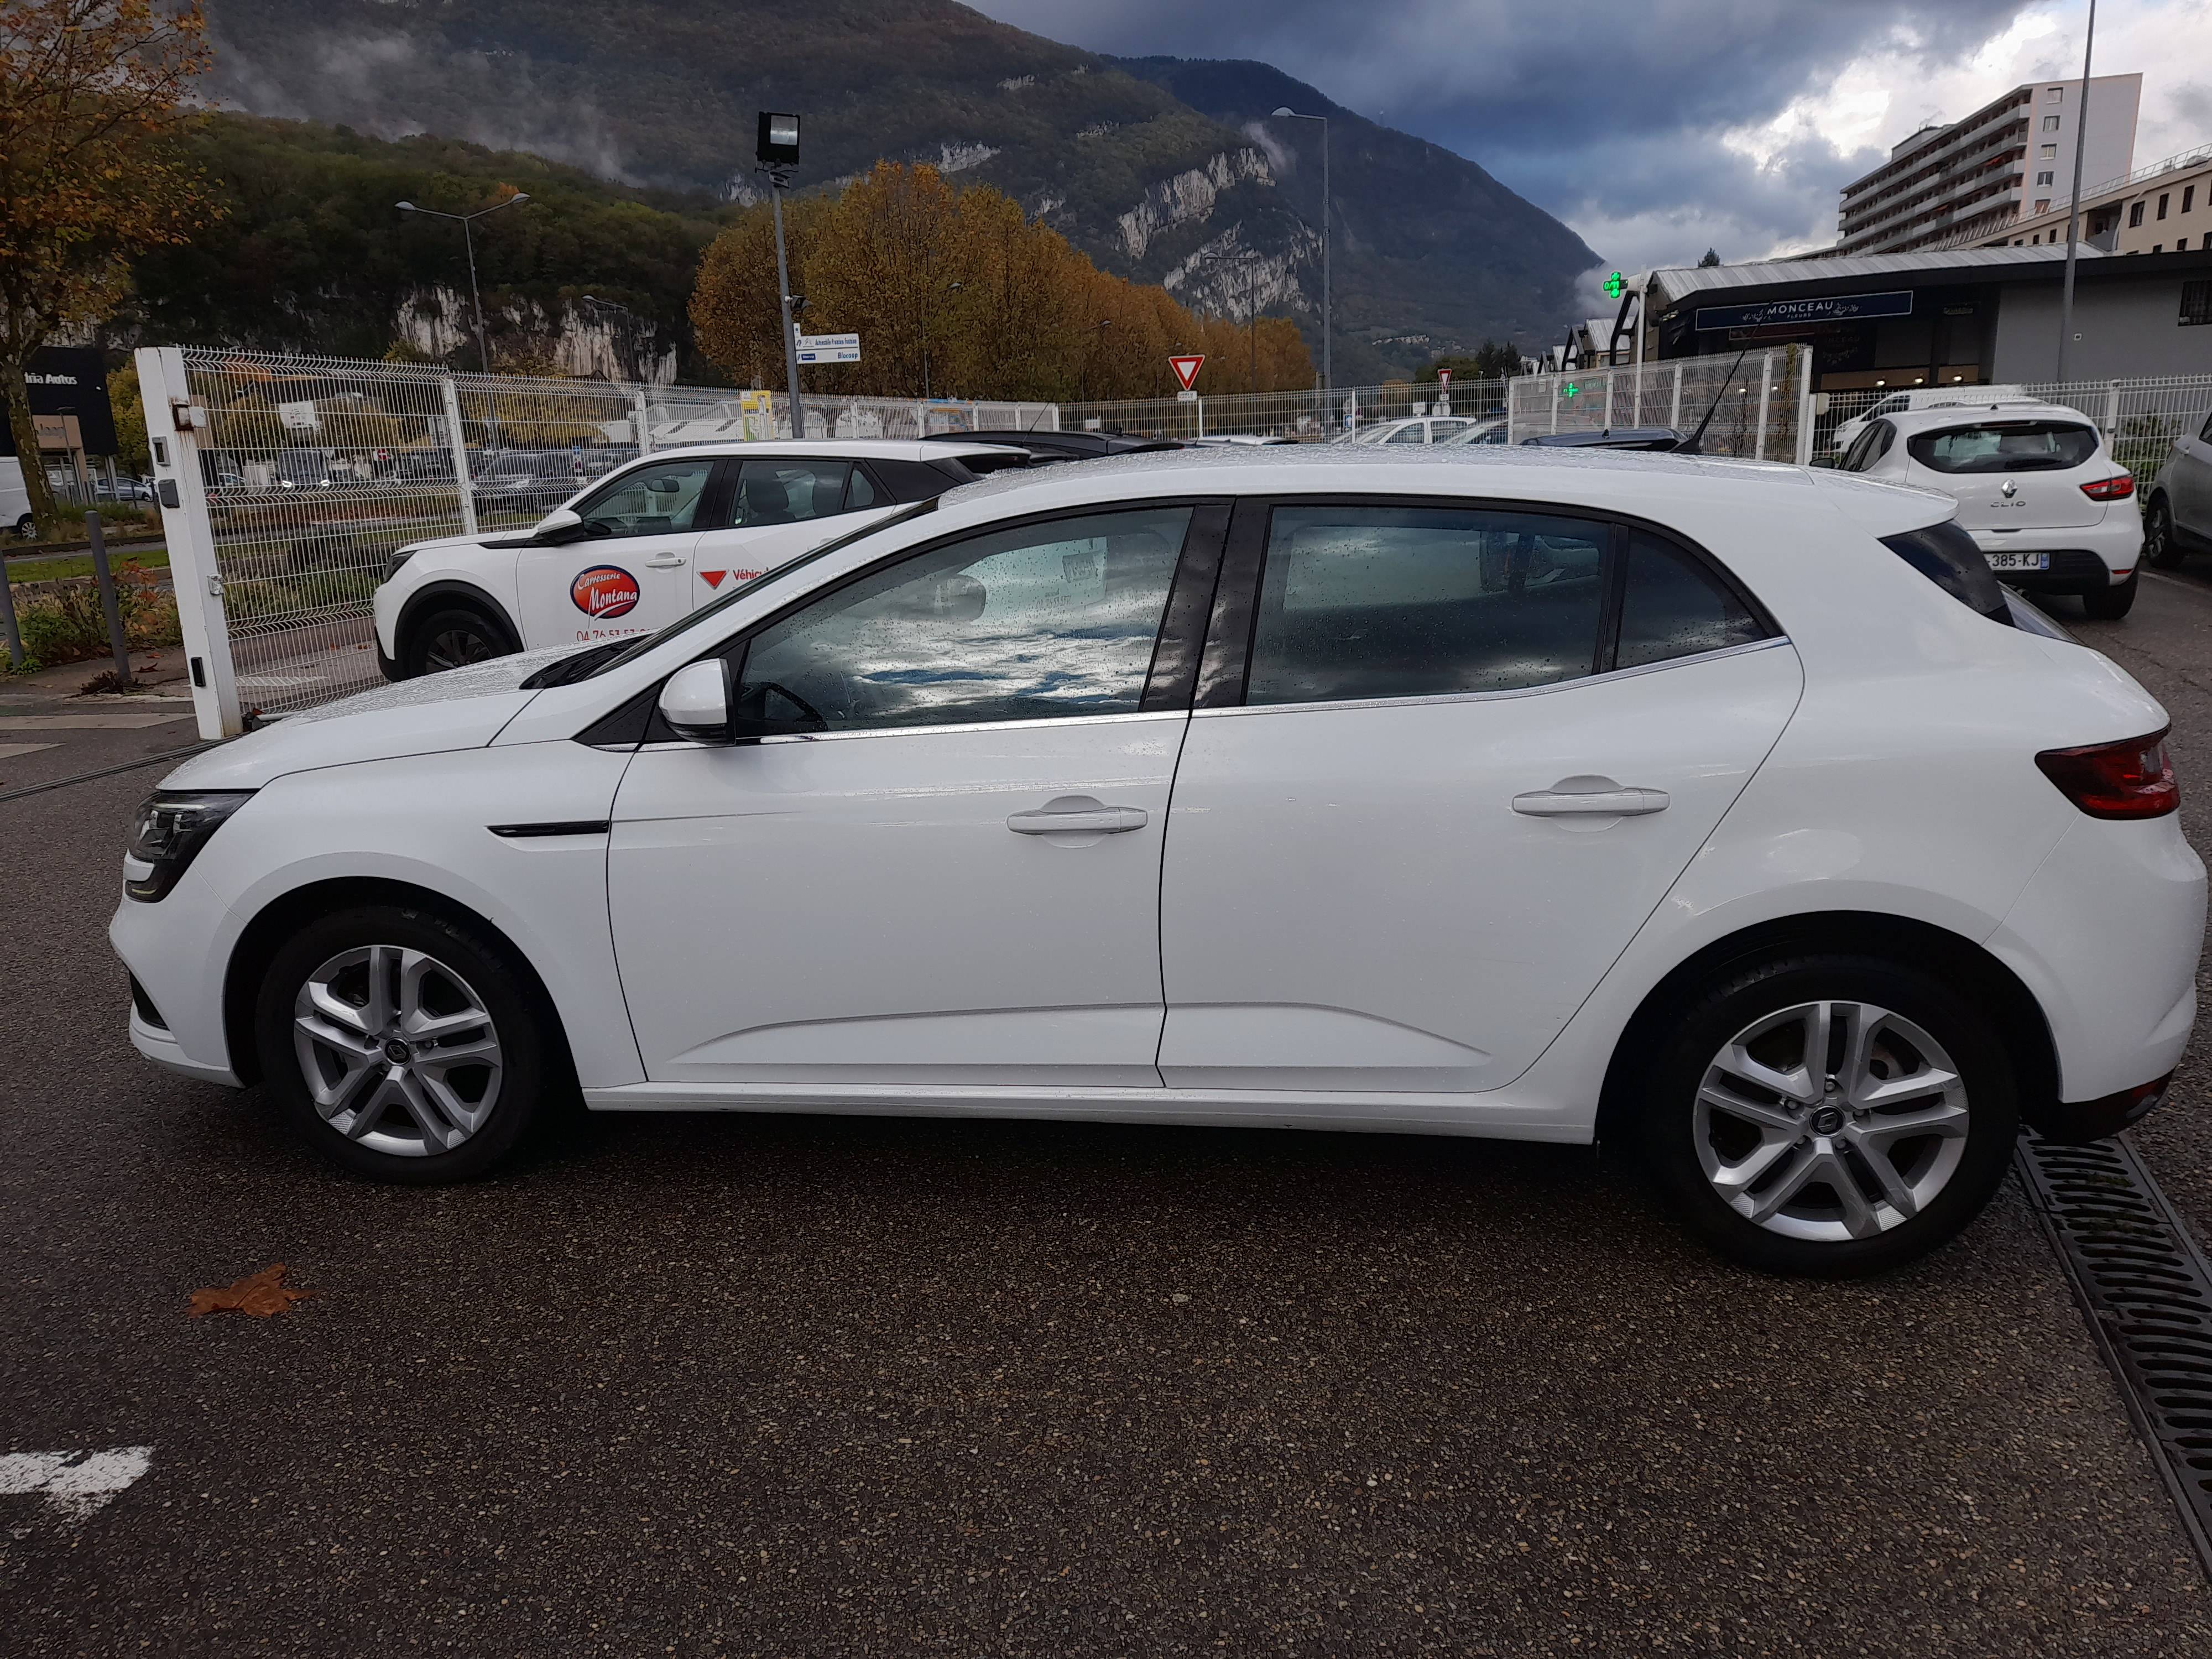 Renault Mégane  IV 1.5 dCi 110ch energy Business occasion - Photo 5